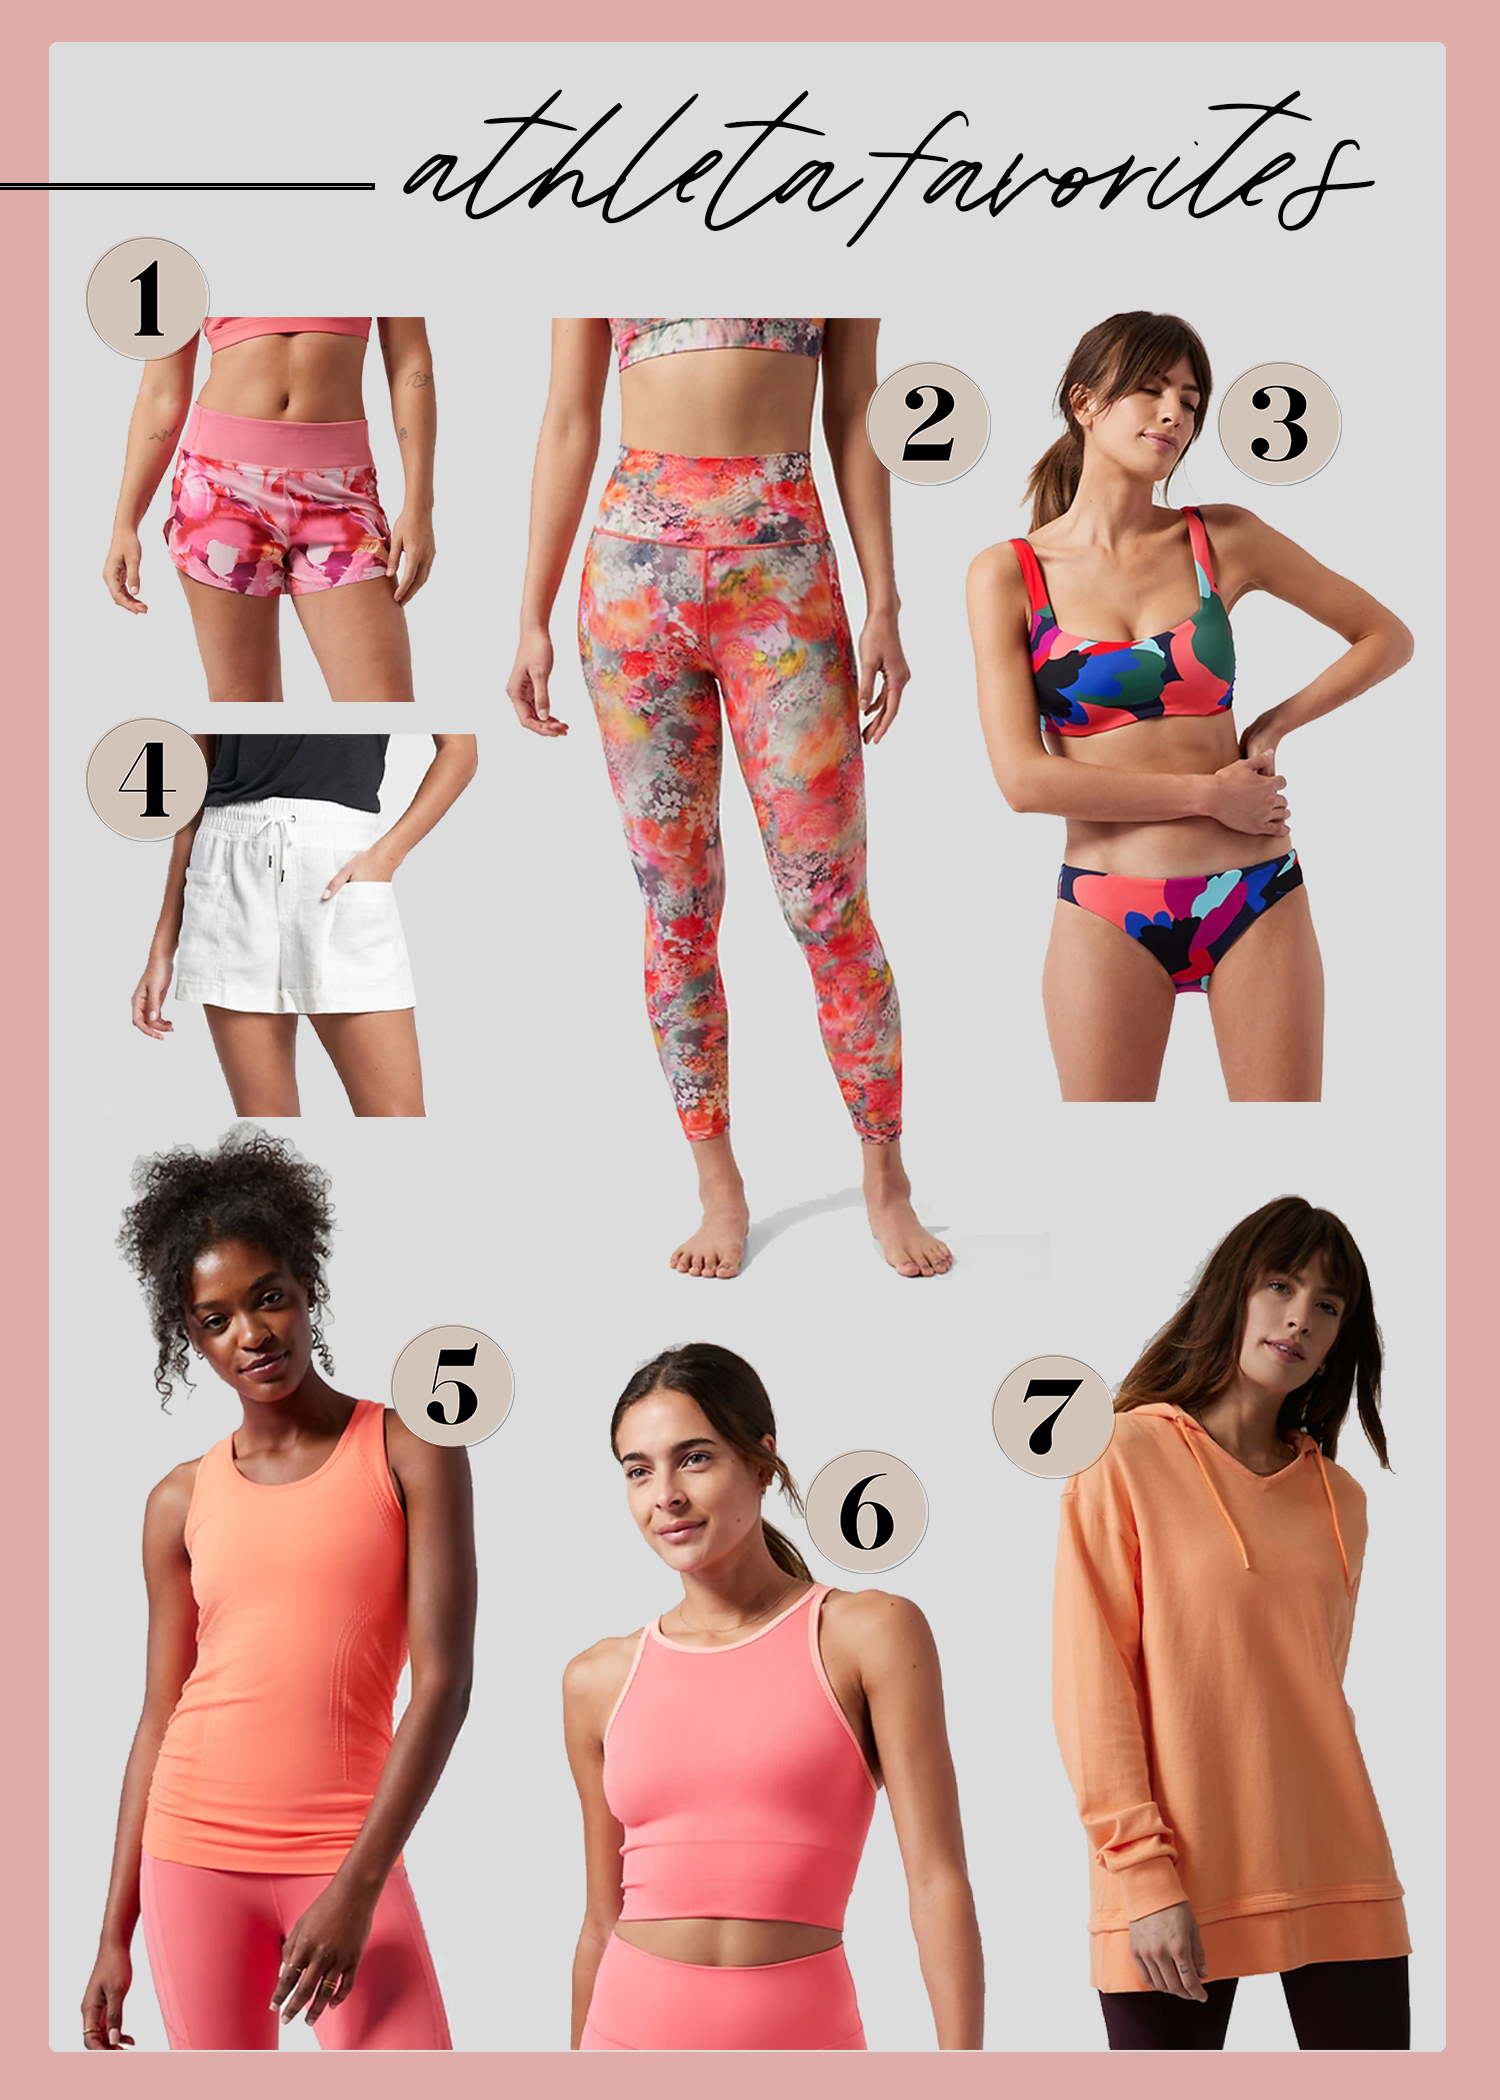 Athleta Igniting our Community of Women // Spring Collection Outfits